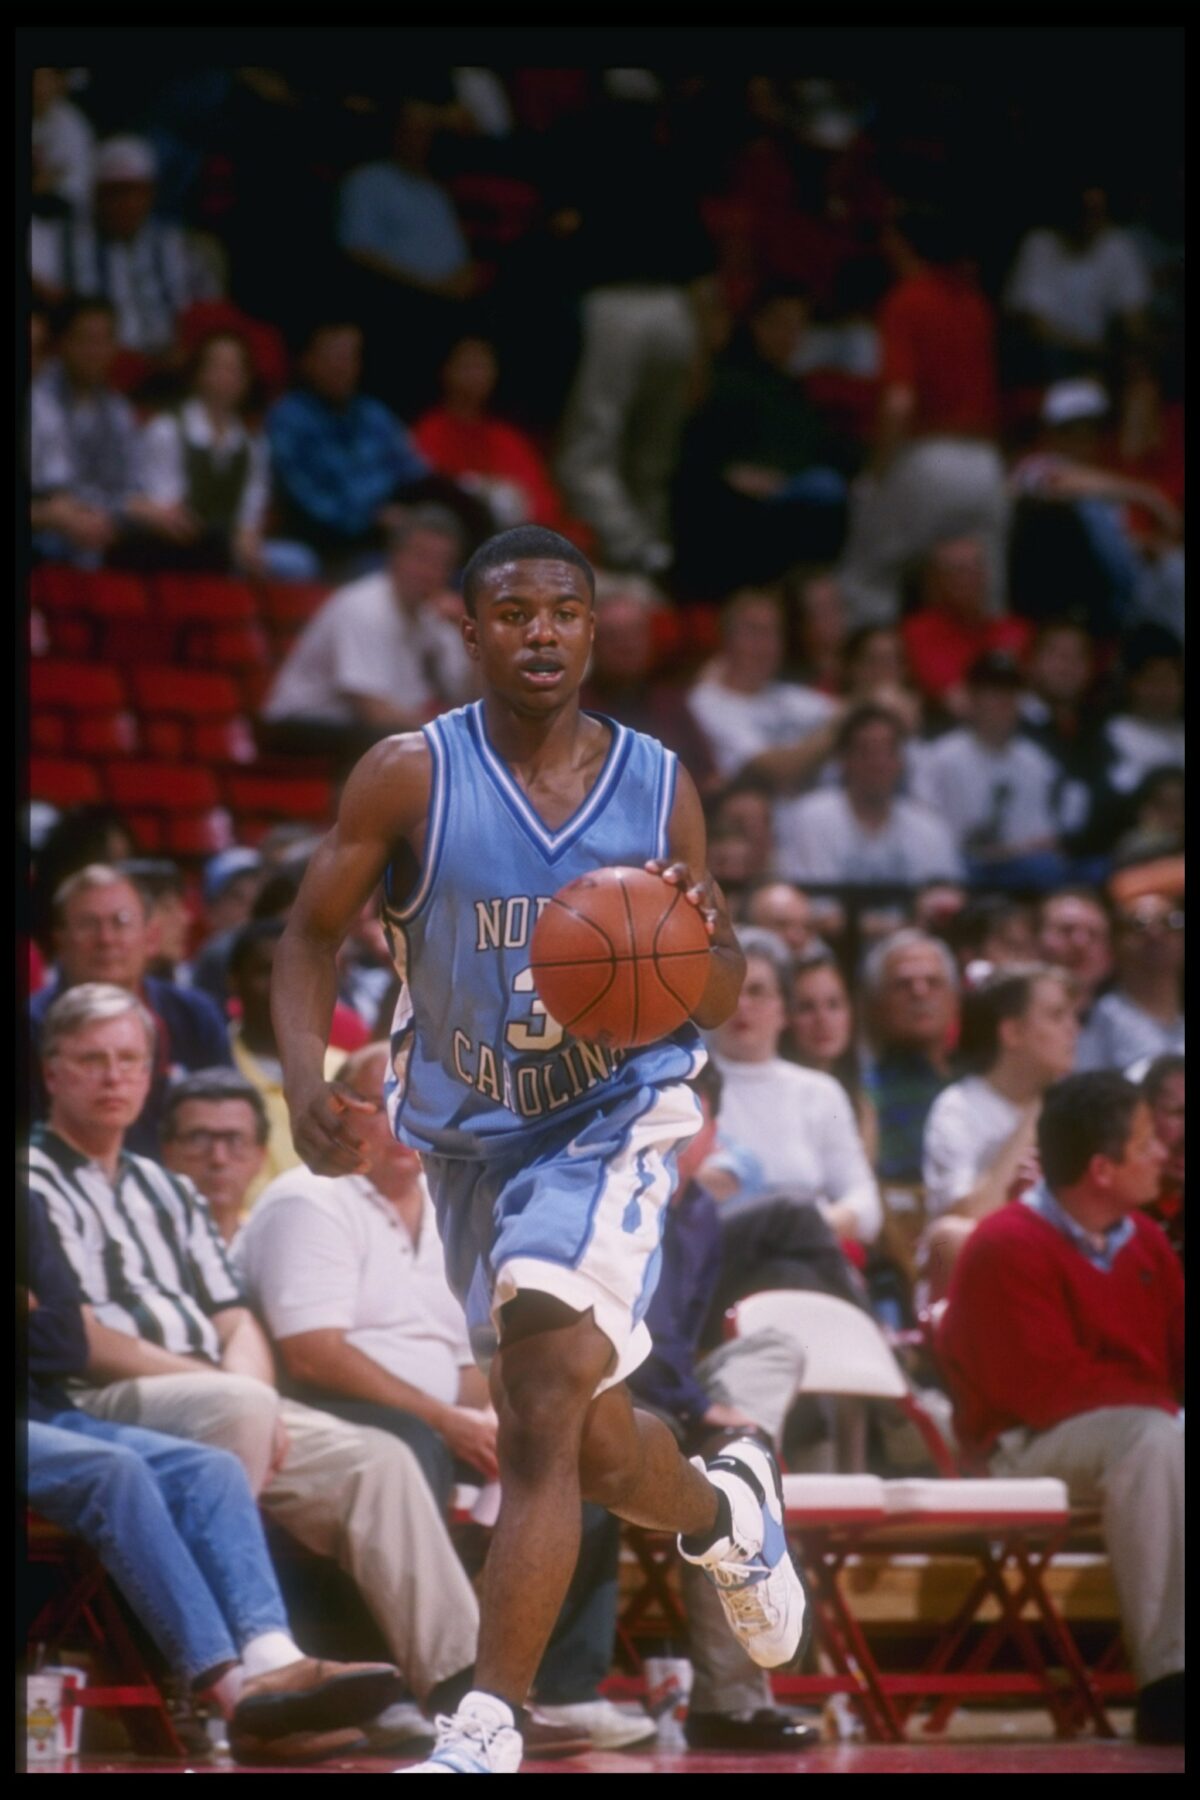 Top 10 scoring games in UNC basketball history